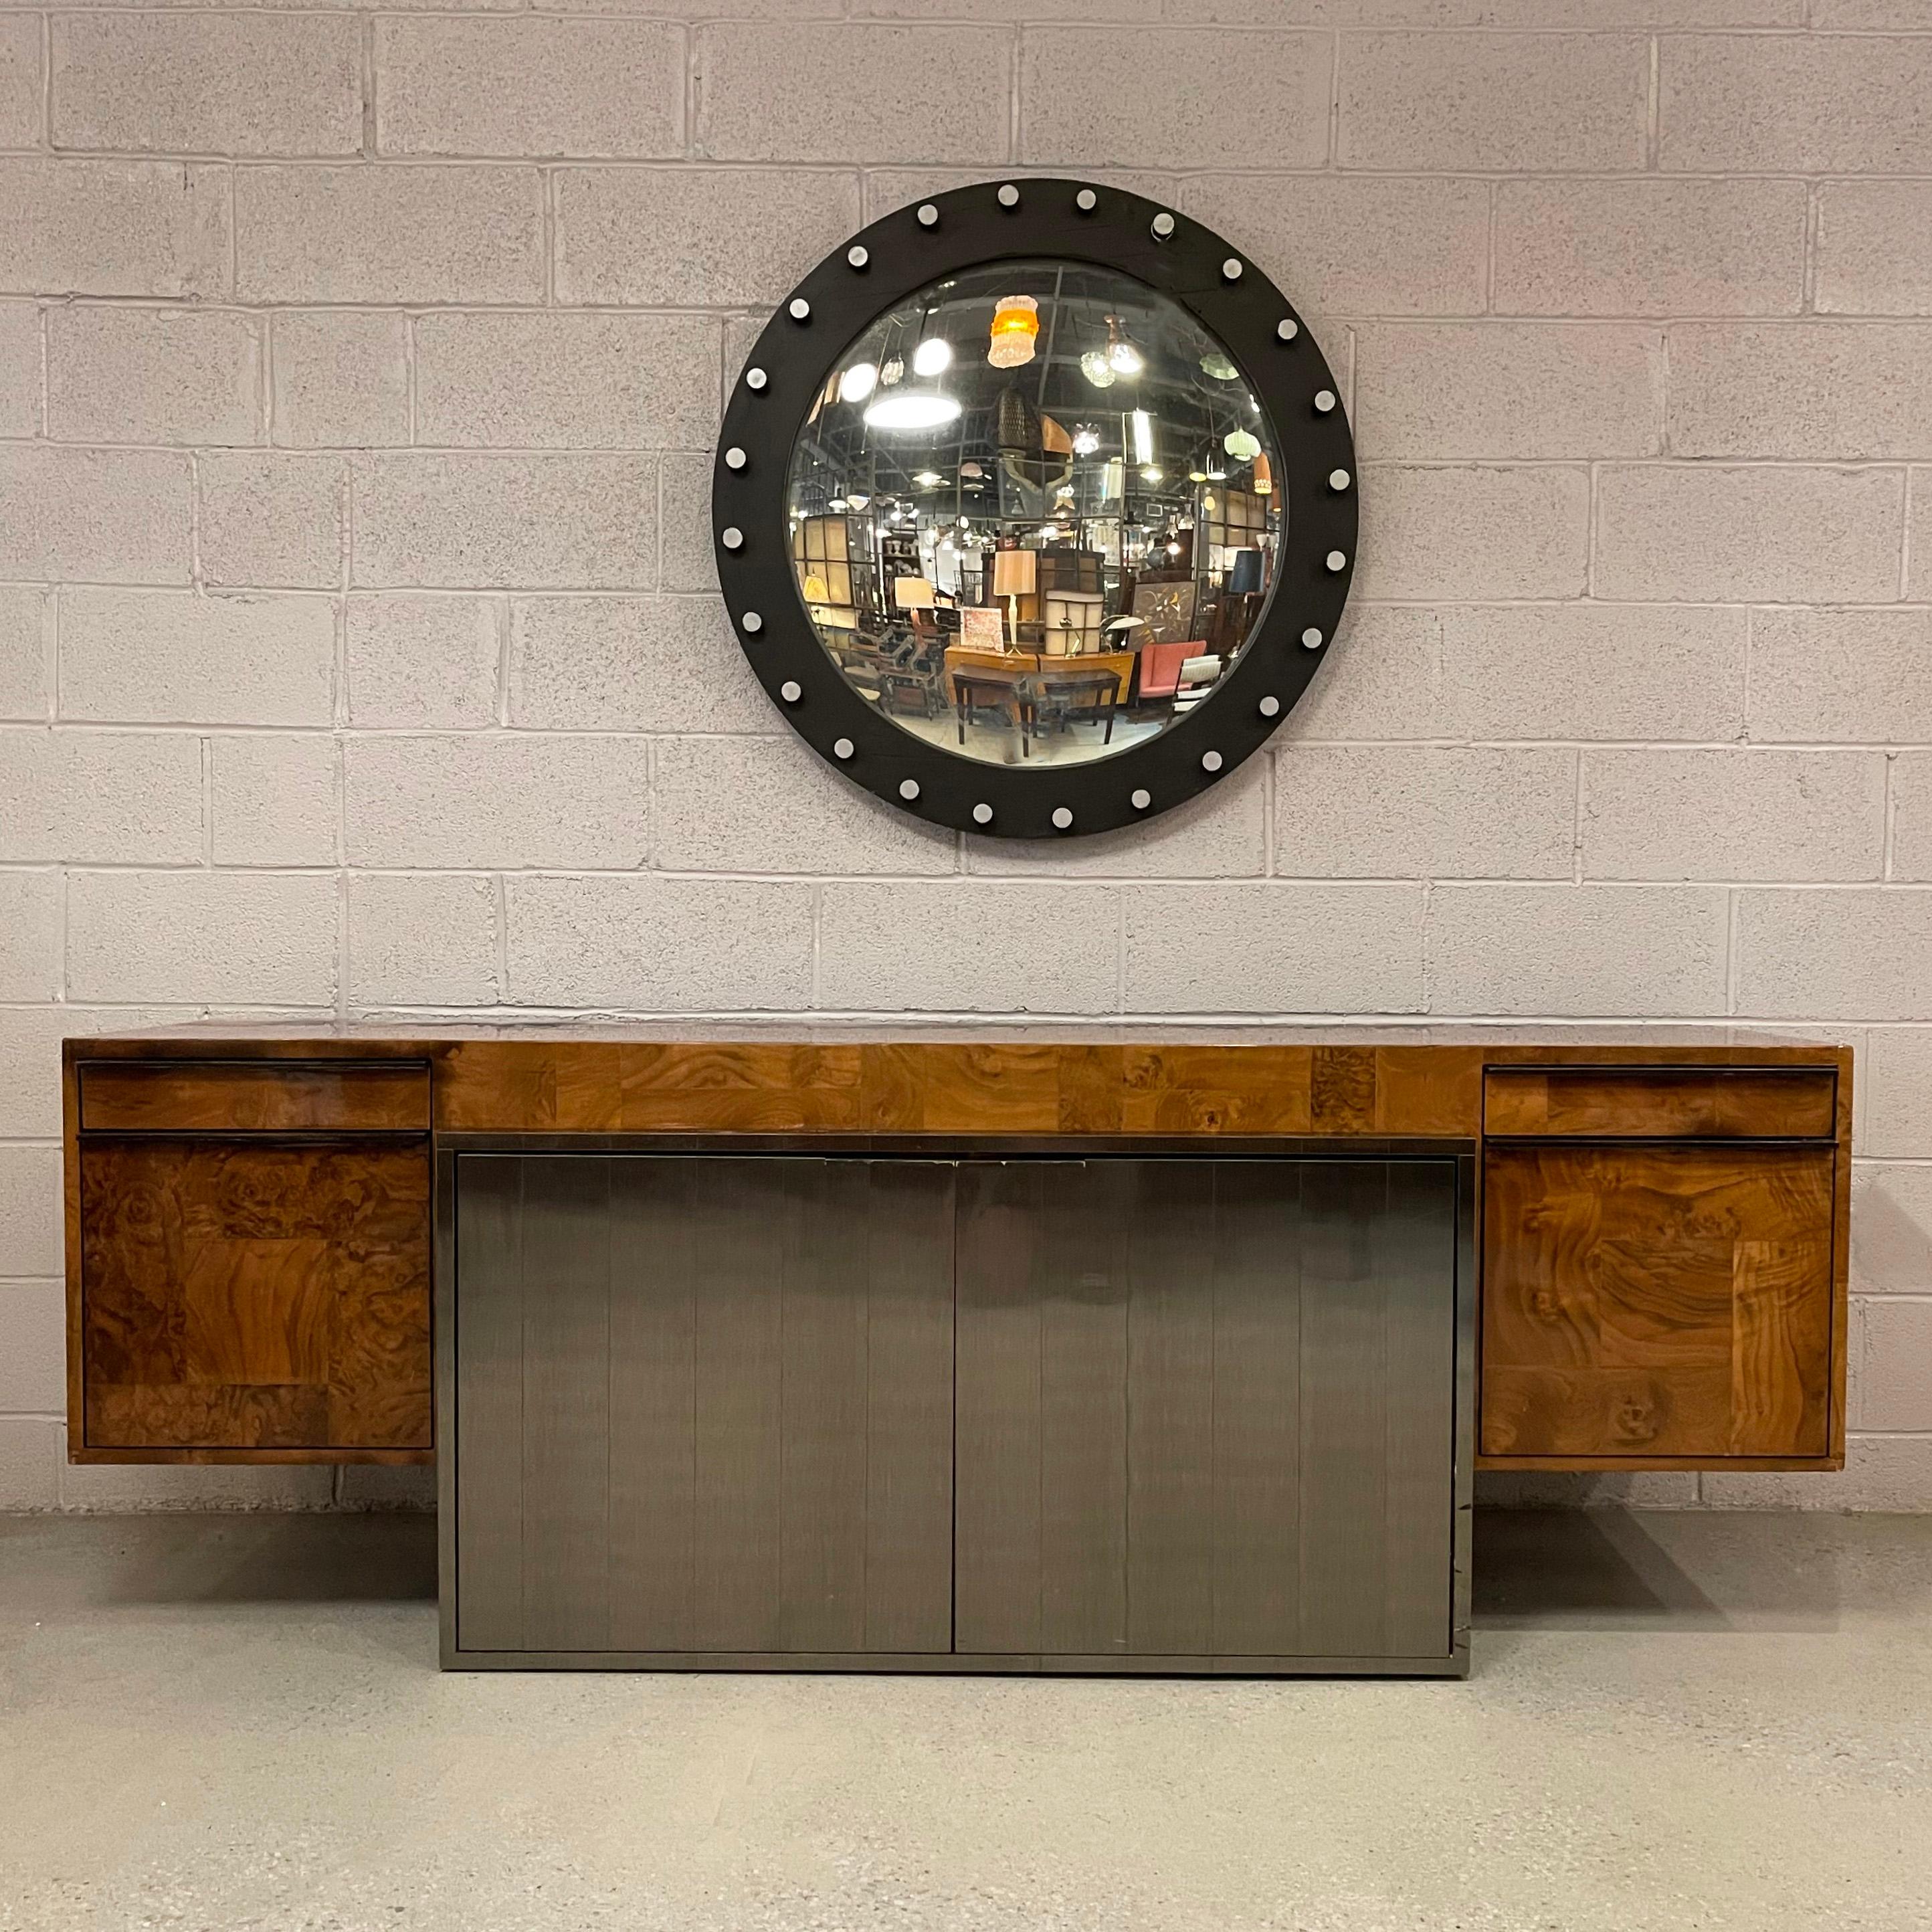 Stunning, modernist, patchwork burl, credenza by Paul Evans for Directional features a high sheen laminate finish with 48 inch wide, gunmetal steel center doors and two 16 inch wide side drawers on either side edged in black laminate. The credenza